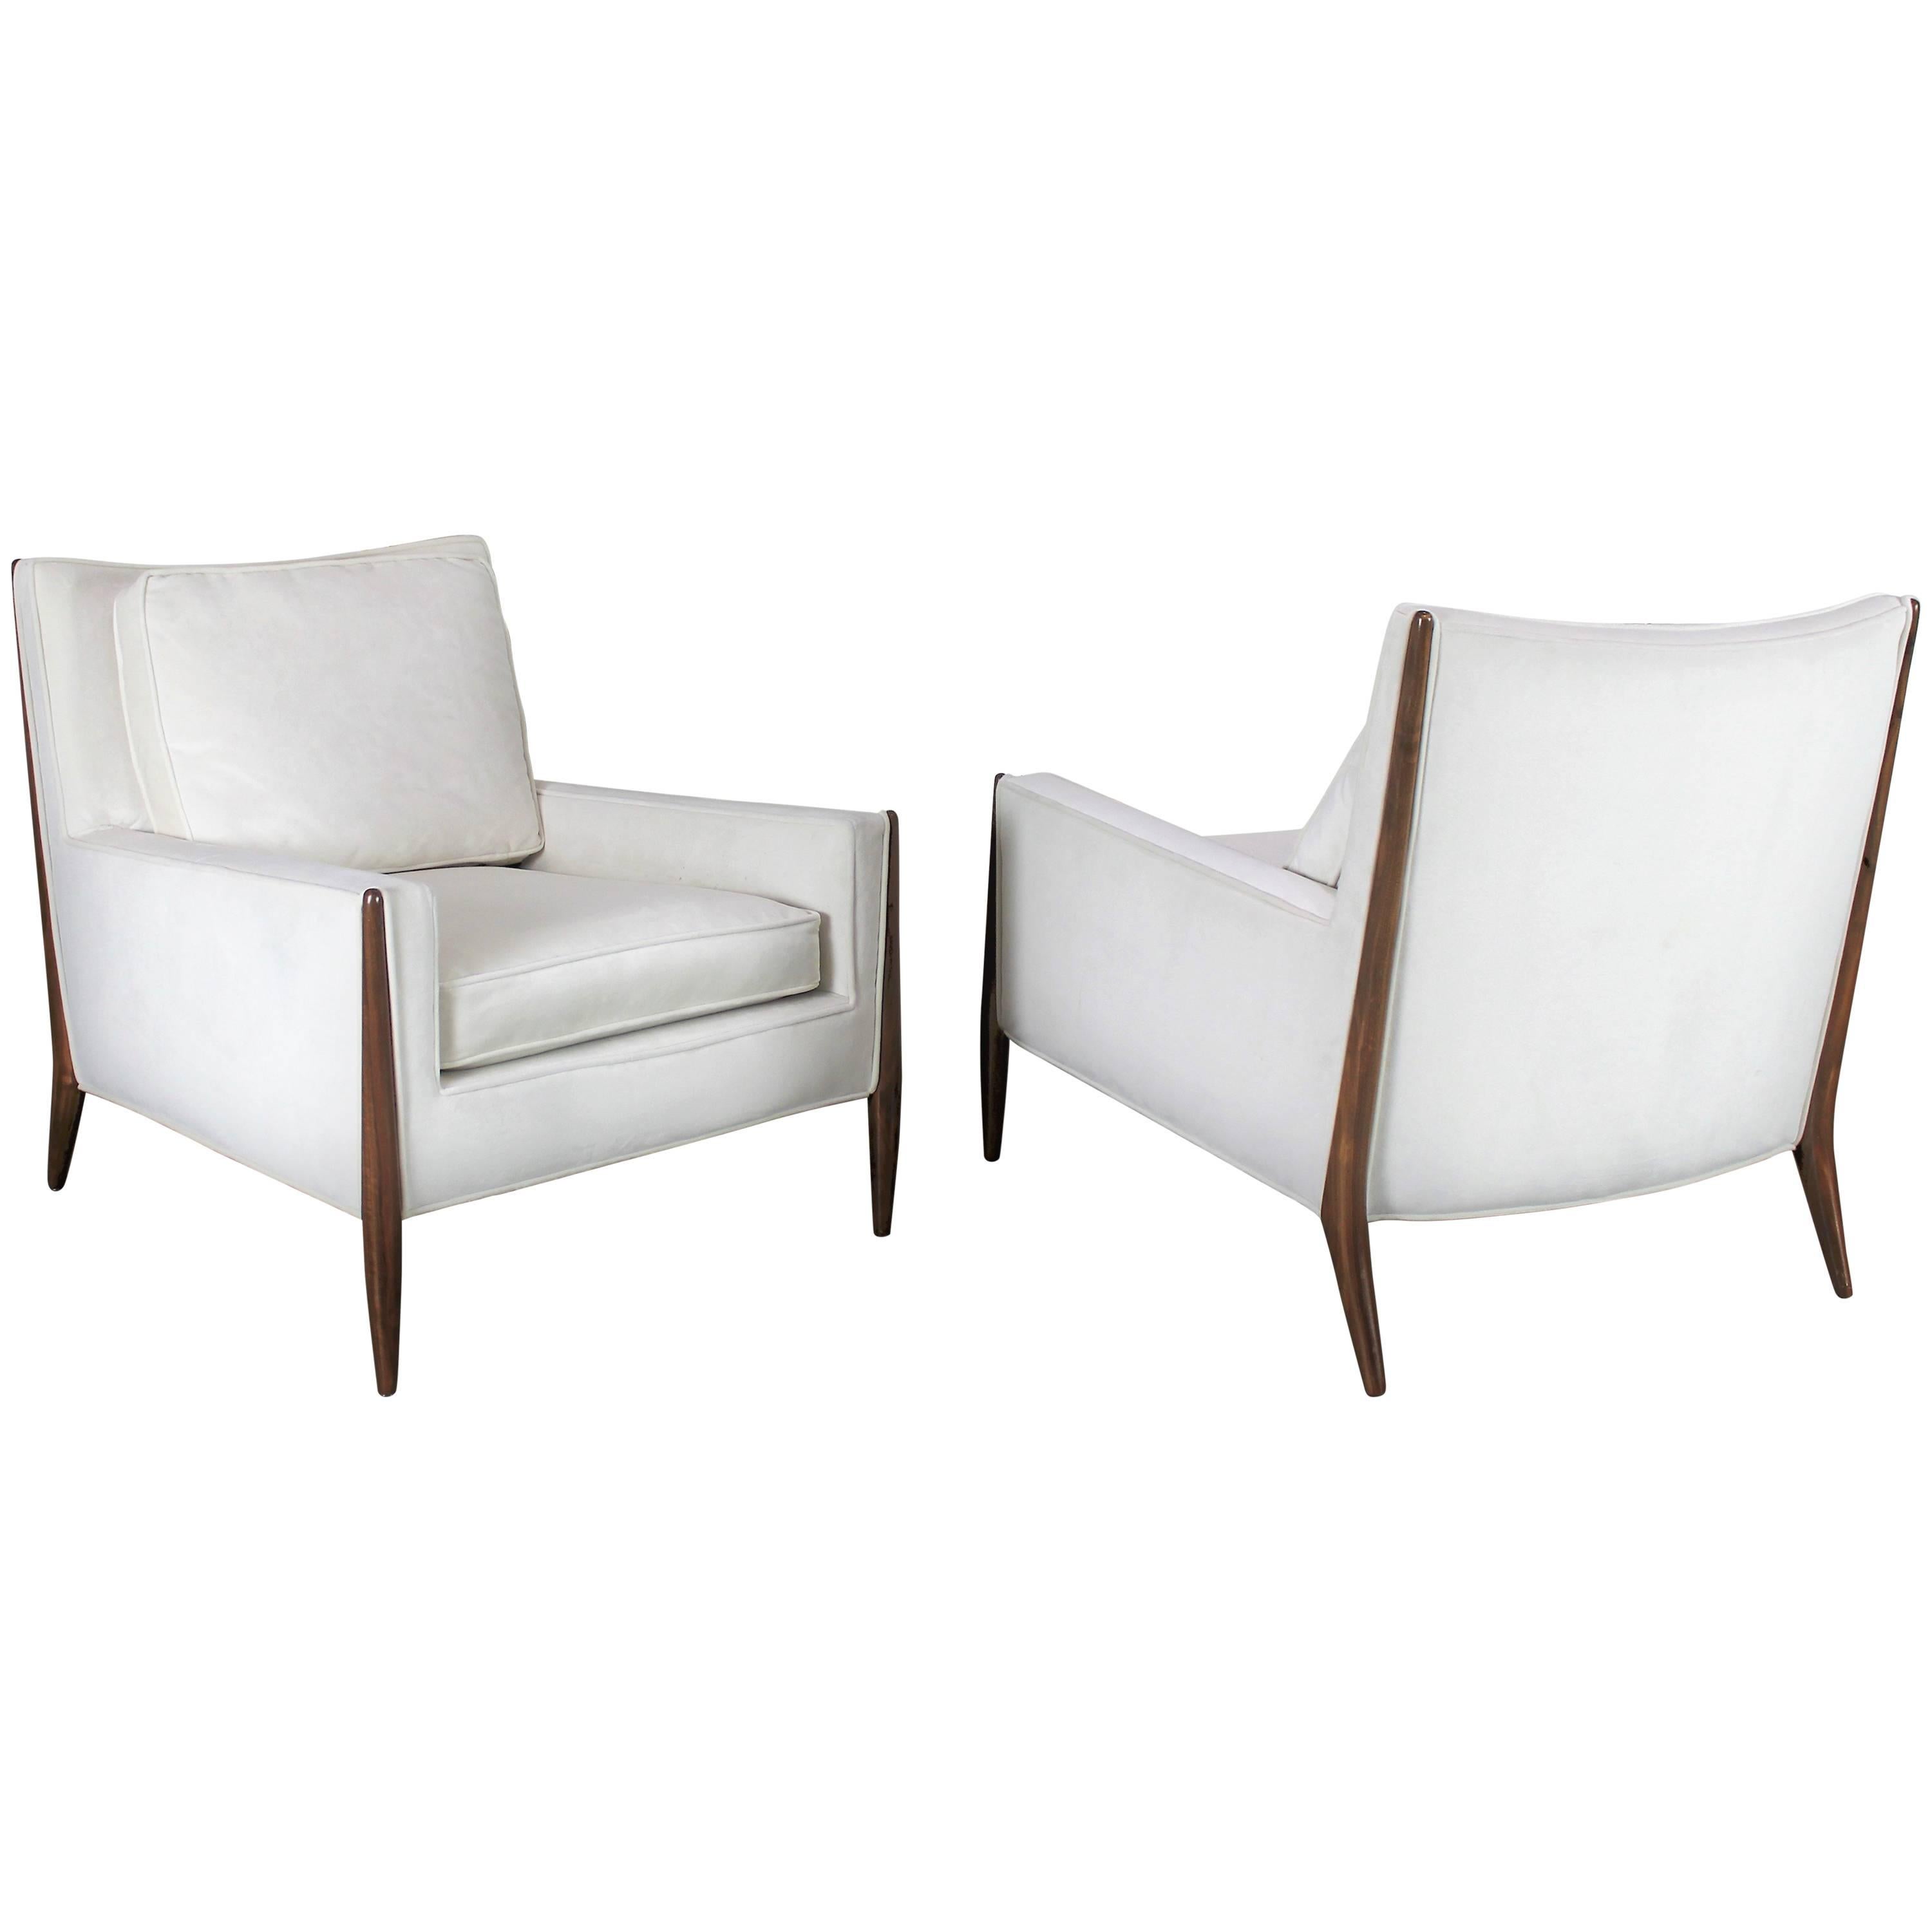 Pair of Sculptural Lounge Chairs After Paul McCobb